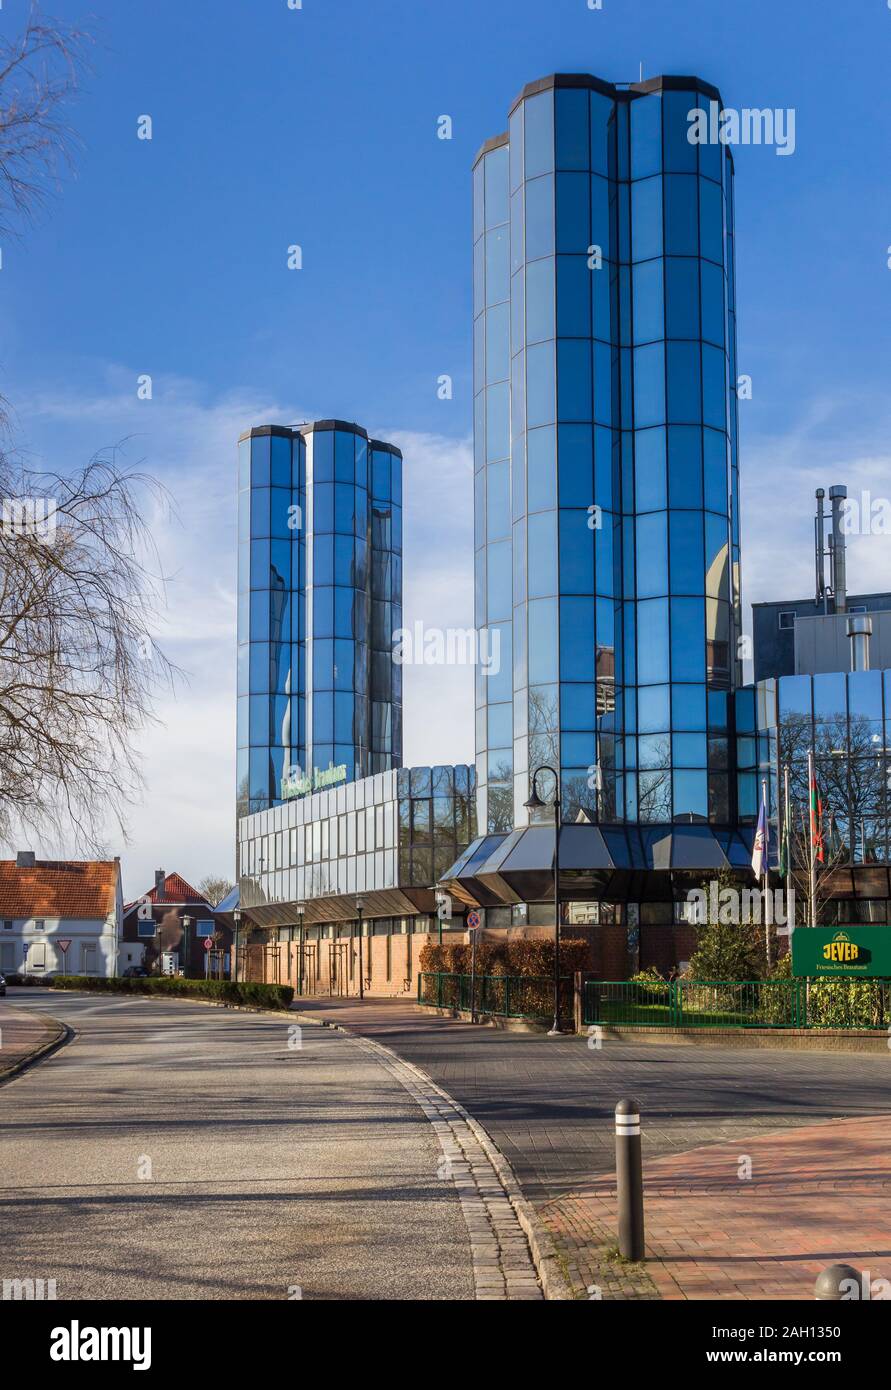 Towers of the beer brewery in Jever, Germany Stock Photo